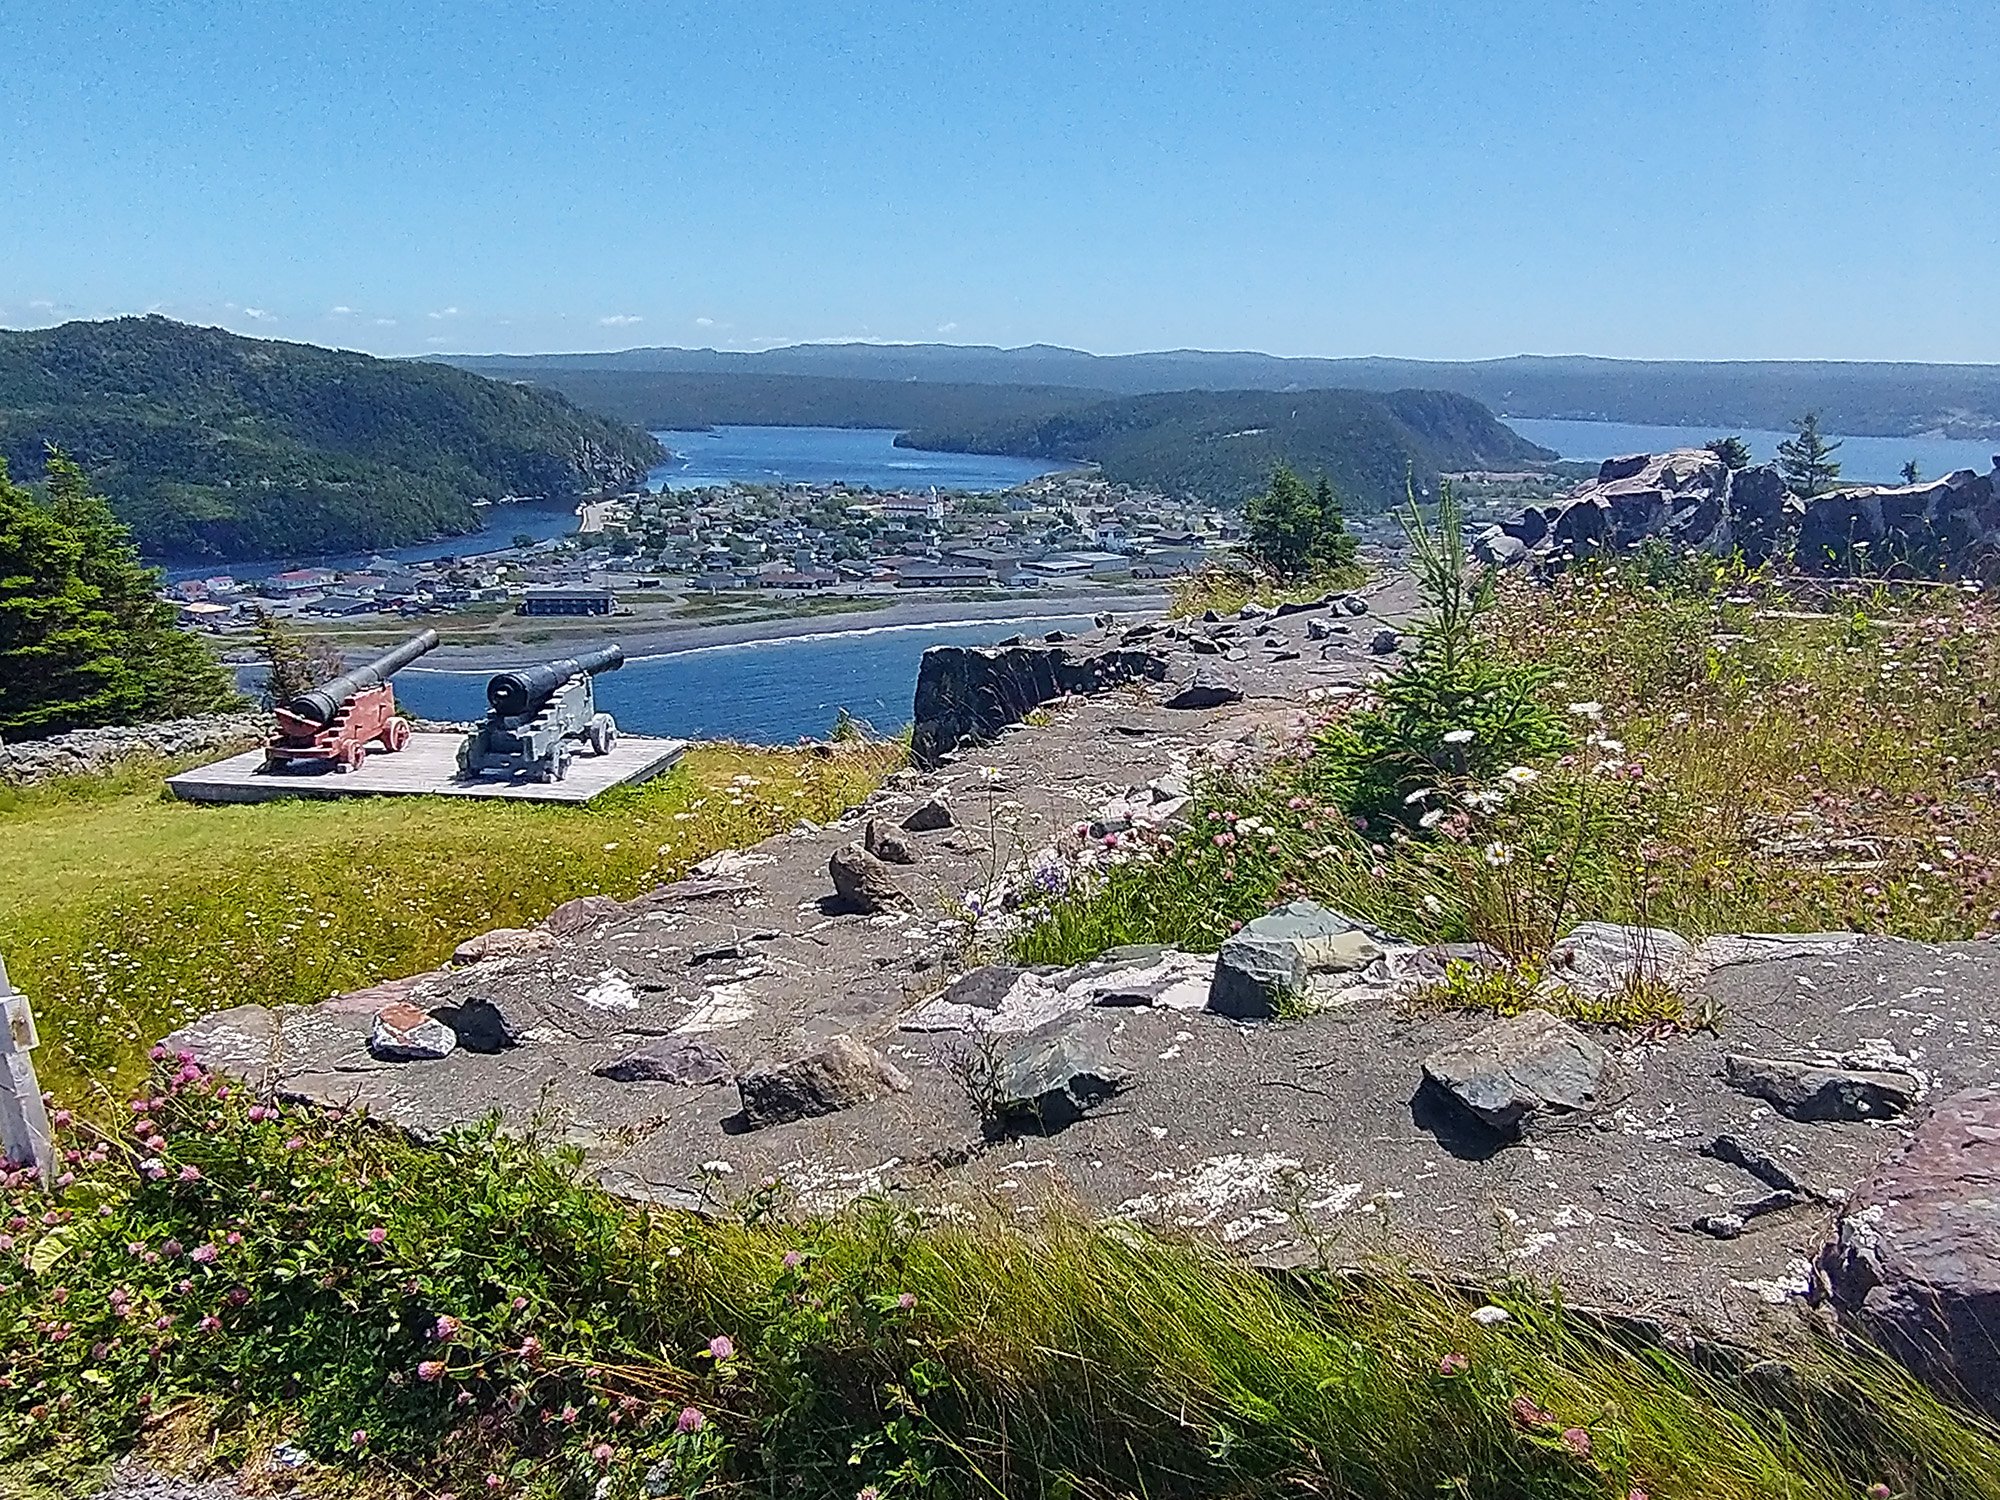 Fort is about 100m above sea level, overlooking the town of Placentia. 